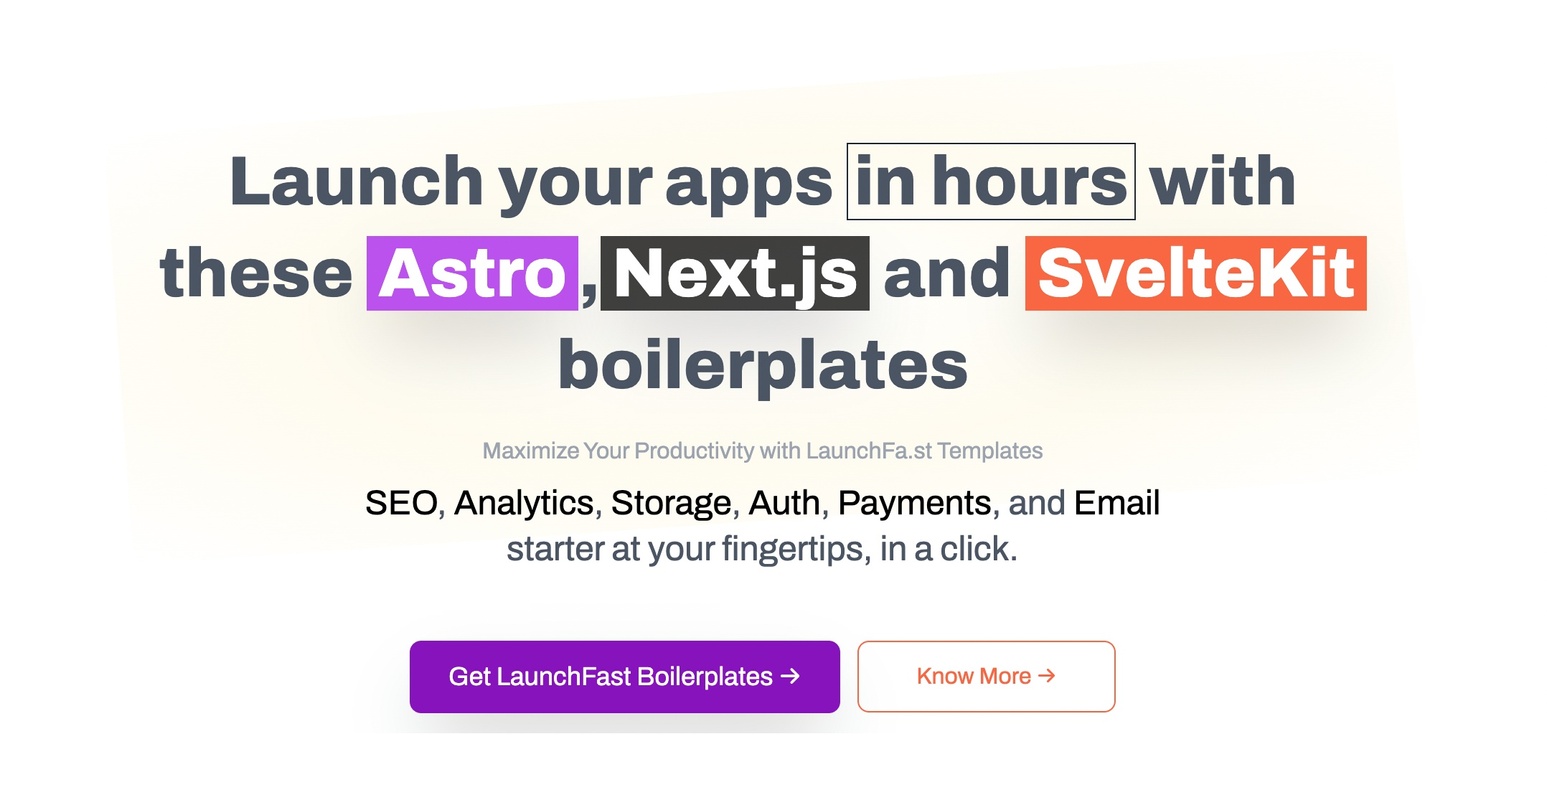 LaunchFa.st - Launch your apps in hours with these Astro, Next.js and SvelteKit boilerplates